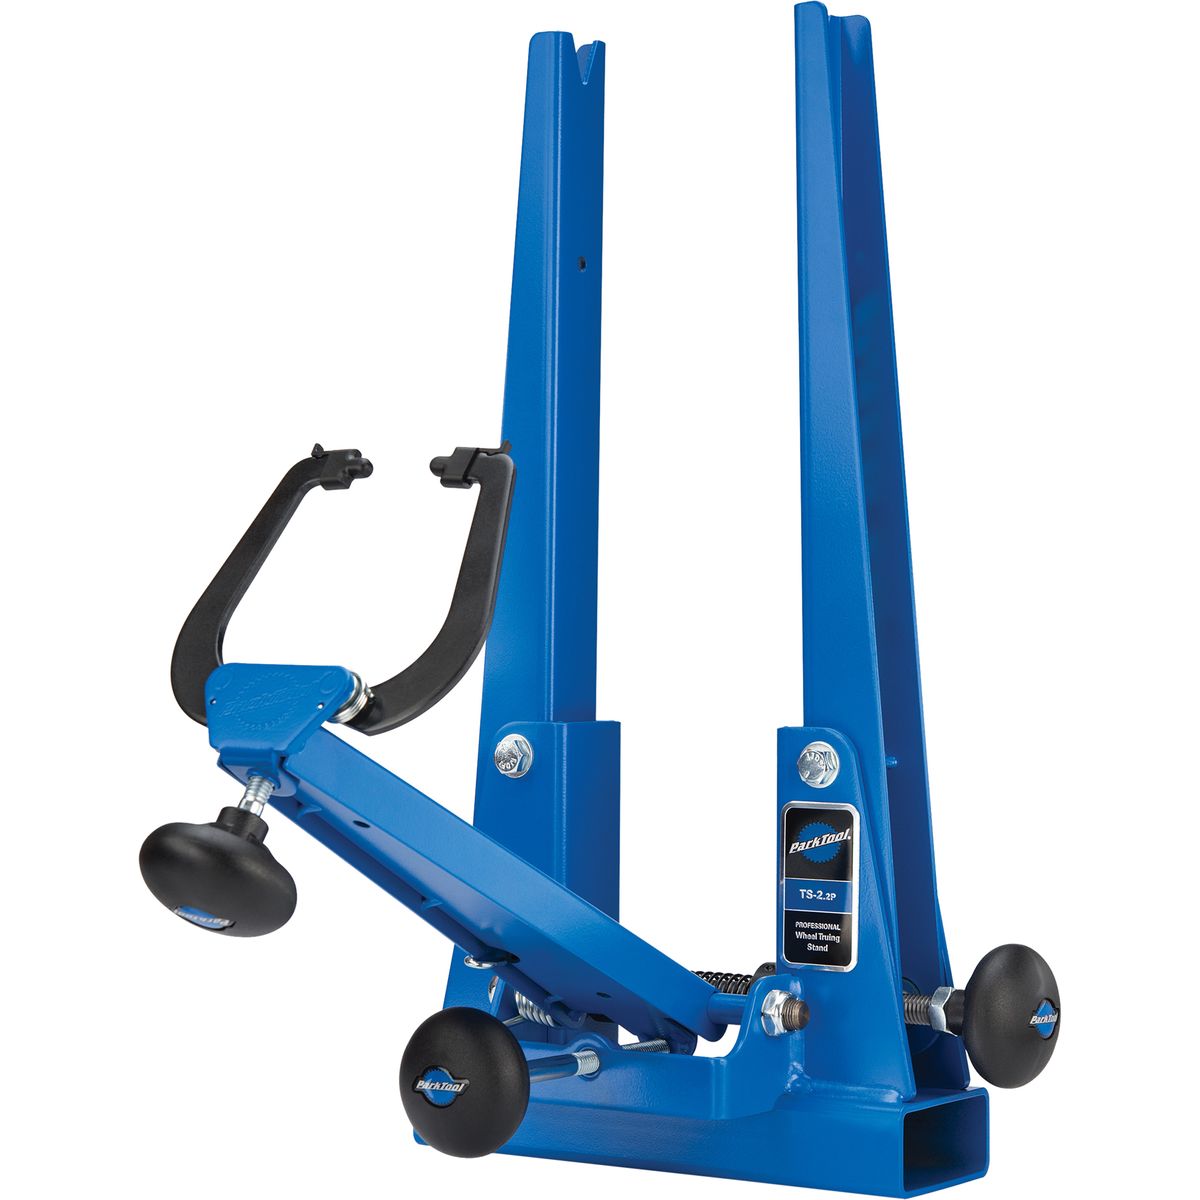 Park Tool TS2.2P Powder Coated Professional Wheel Truing Stand